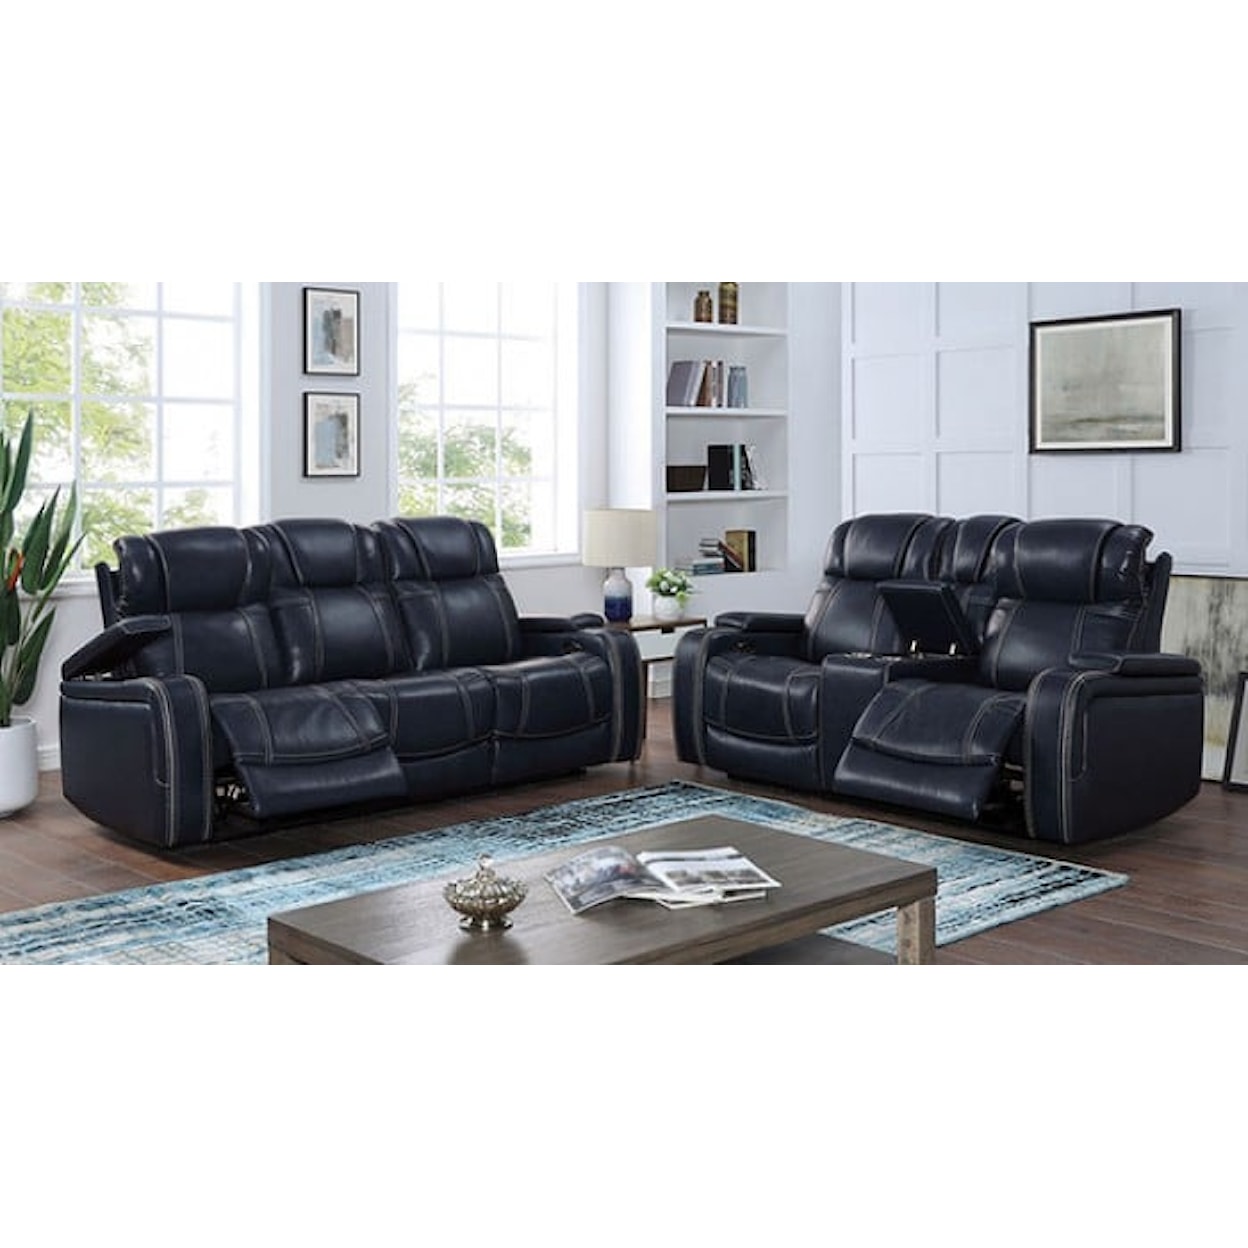 Furniture of America ZEPHYR Power Reclining Sofa and Loveseat